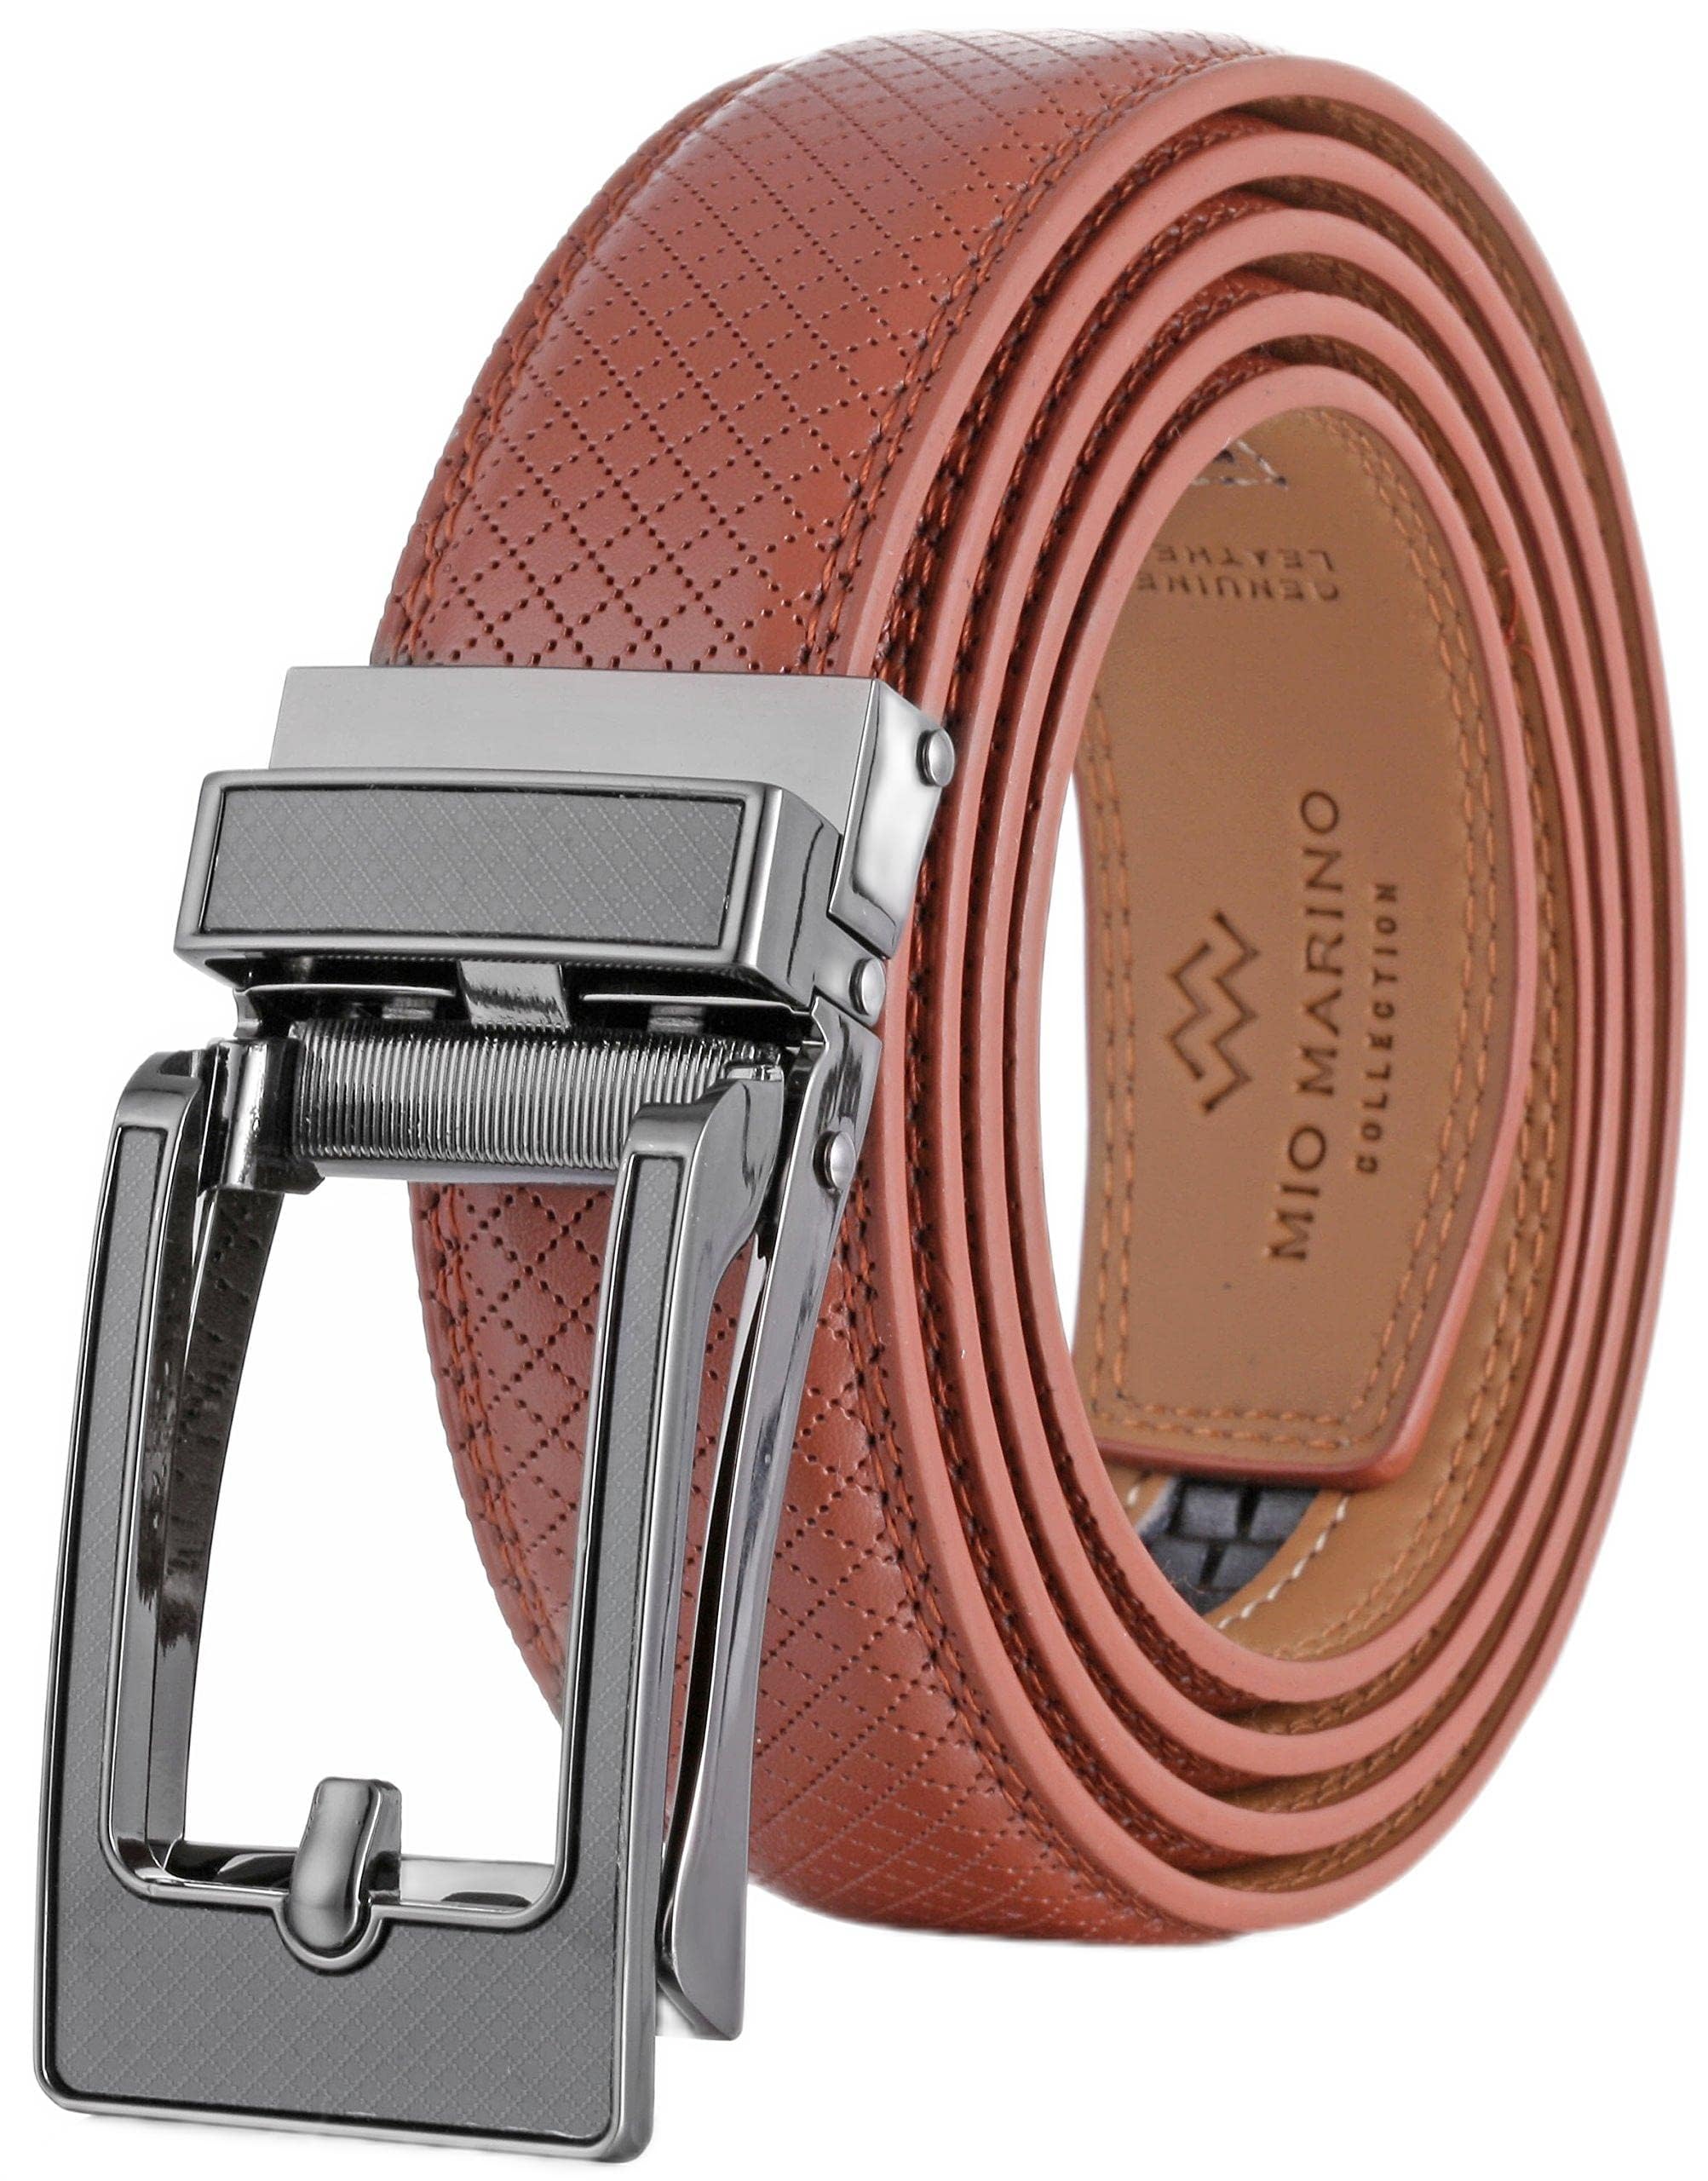 Mens Belt – Italian Designer Leather Belt by Mio Marino – Easy to Adjust Linxx Buckle – Perfect for Casual or Dress Occasion $7.98